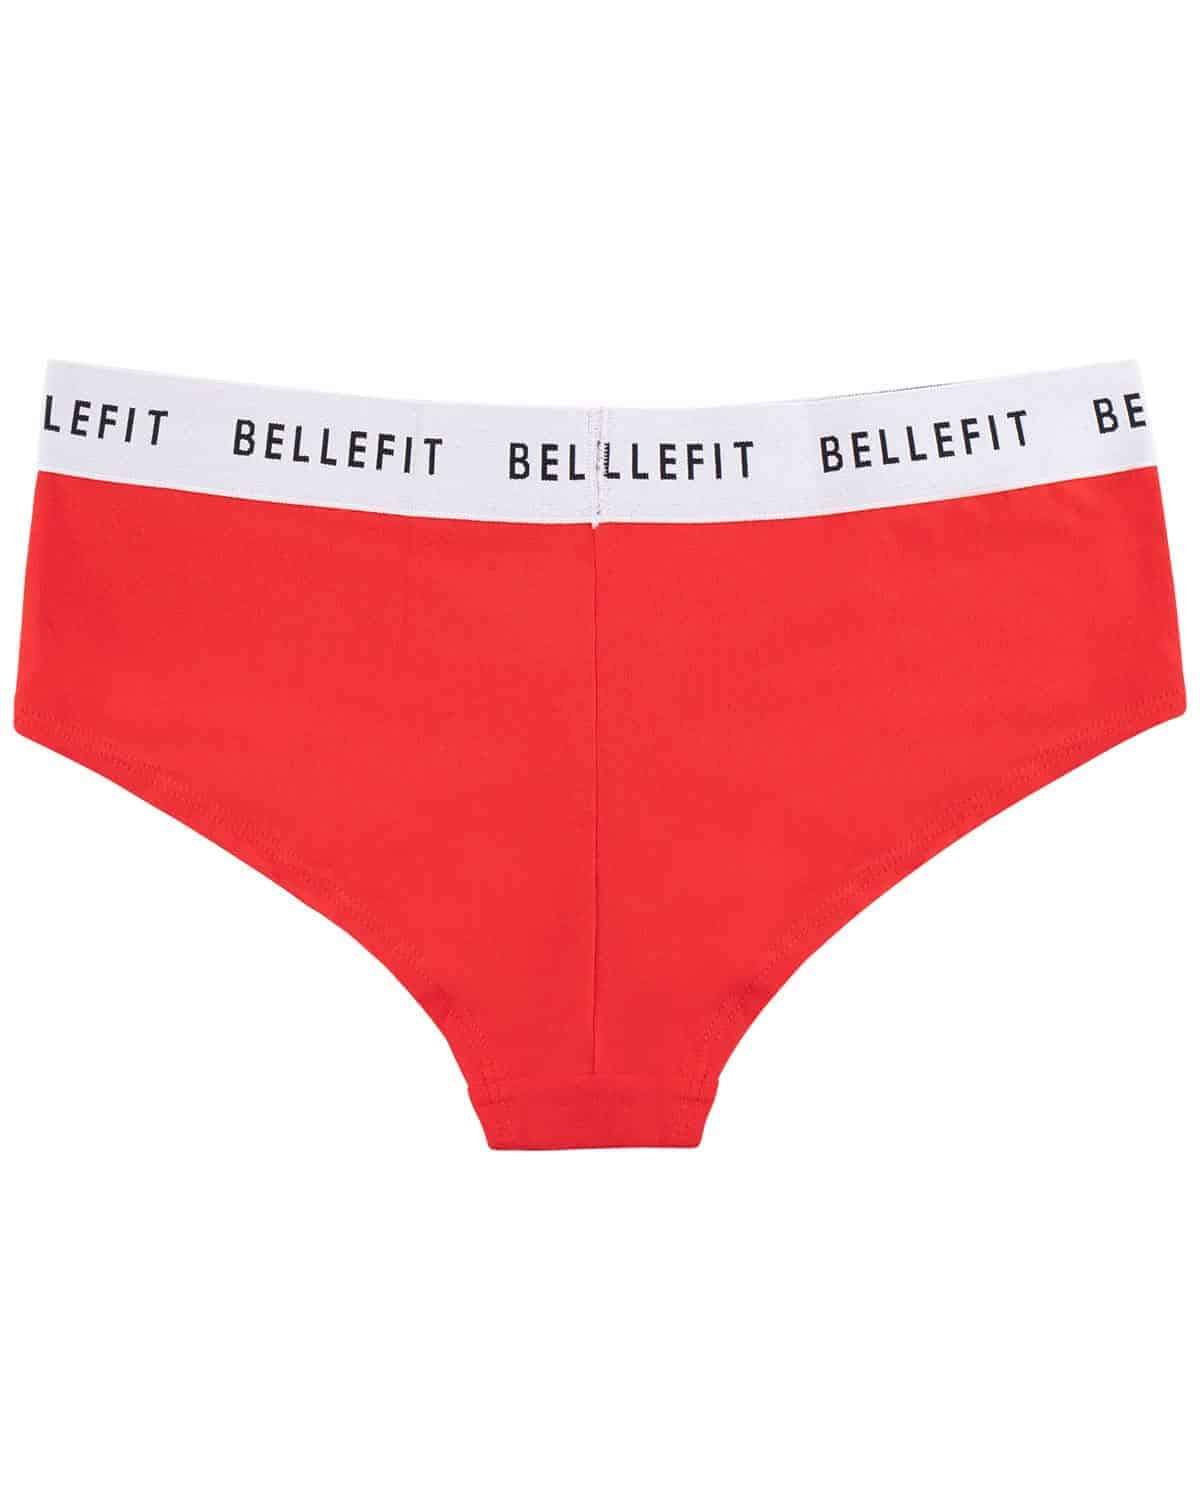 Low Rise Cotton Cheeky Underwear Keeps You Cool Anytime